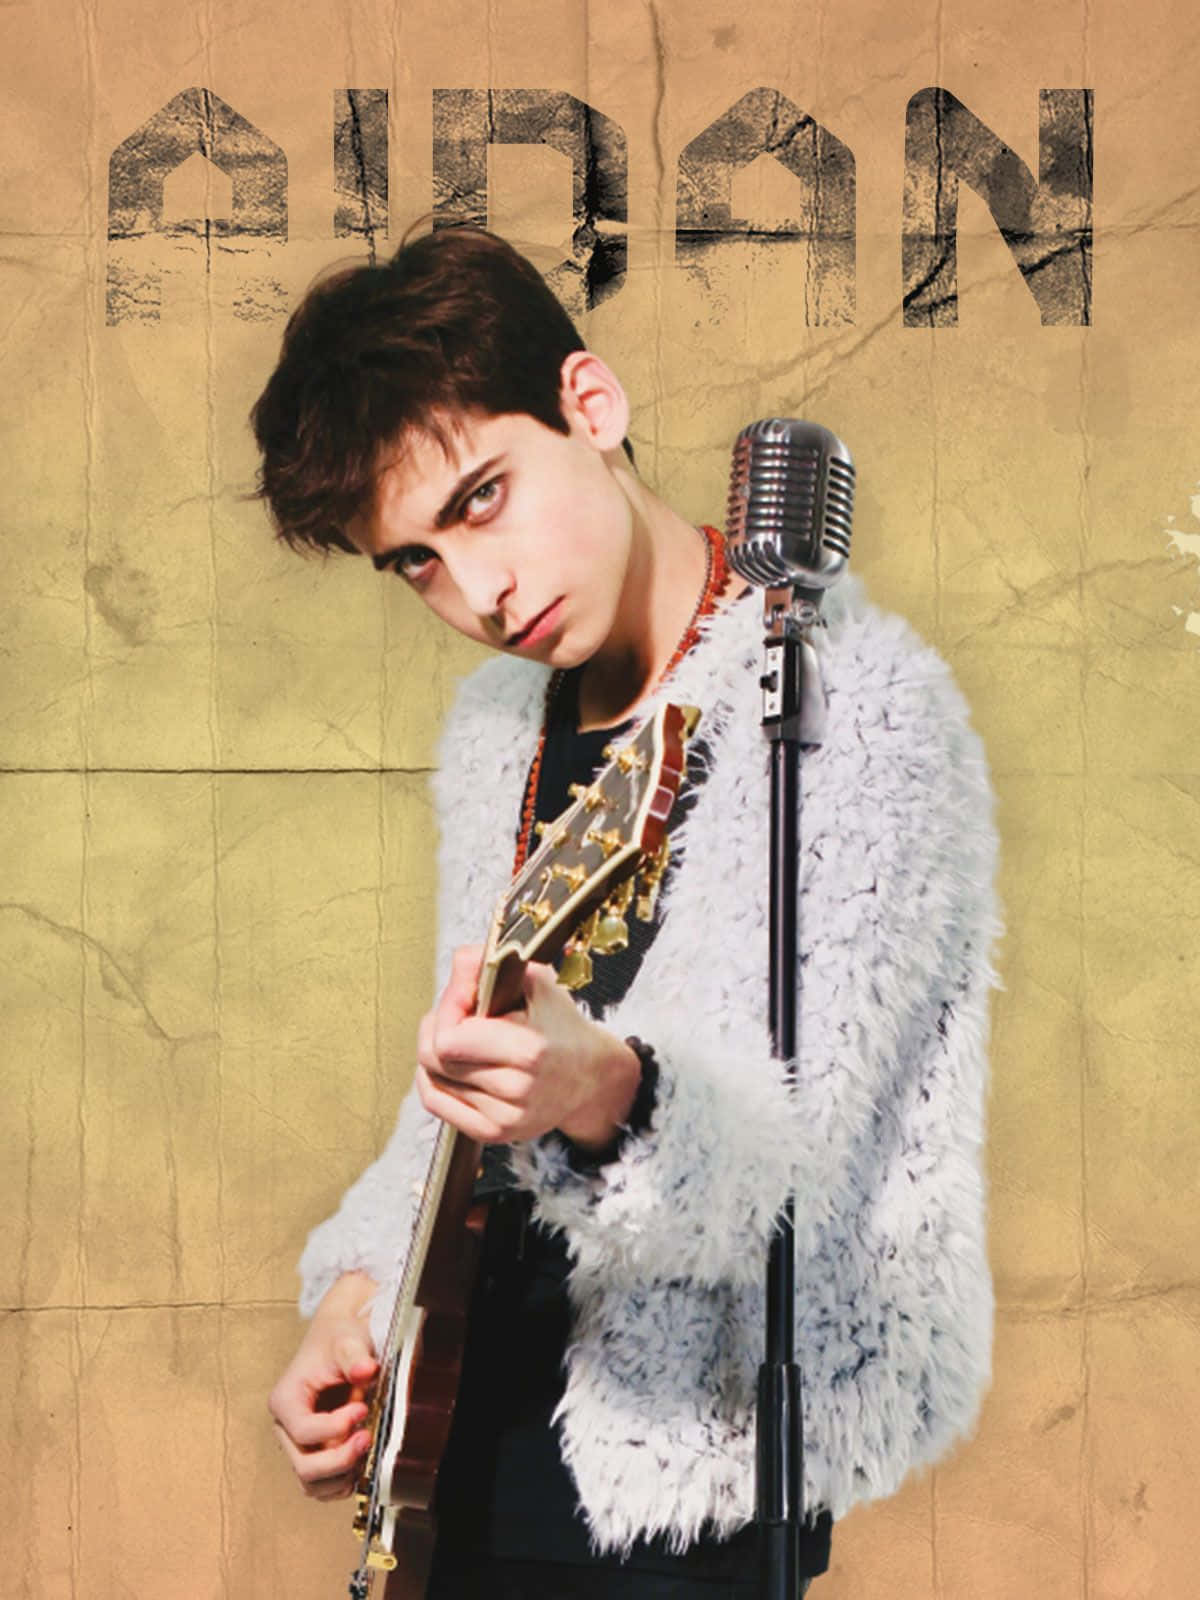 Aidan Gallagher Wowing Fans With Vibrant Performance Wallpaper